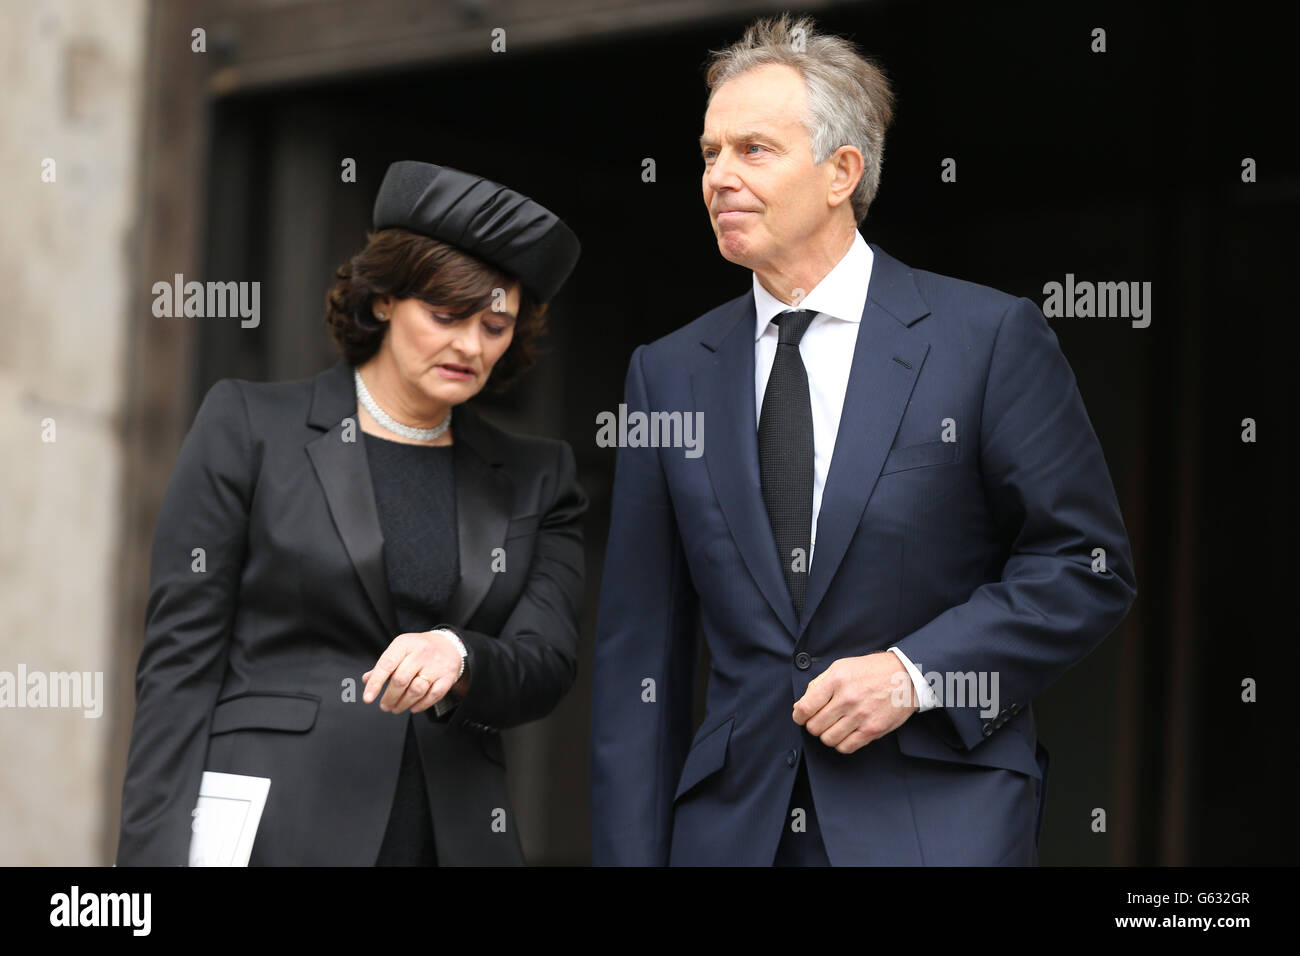 Former Prime Minister Tony Blair and his wife Cherie Blair leave the Ceremonial funeral of former British Prime Minister Baroness Thatcher at St Paul's Cathedral. Stock Photo